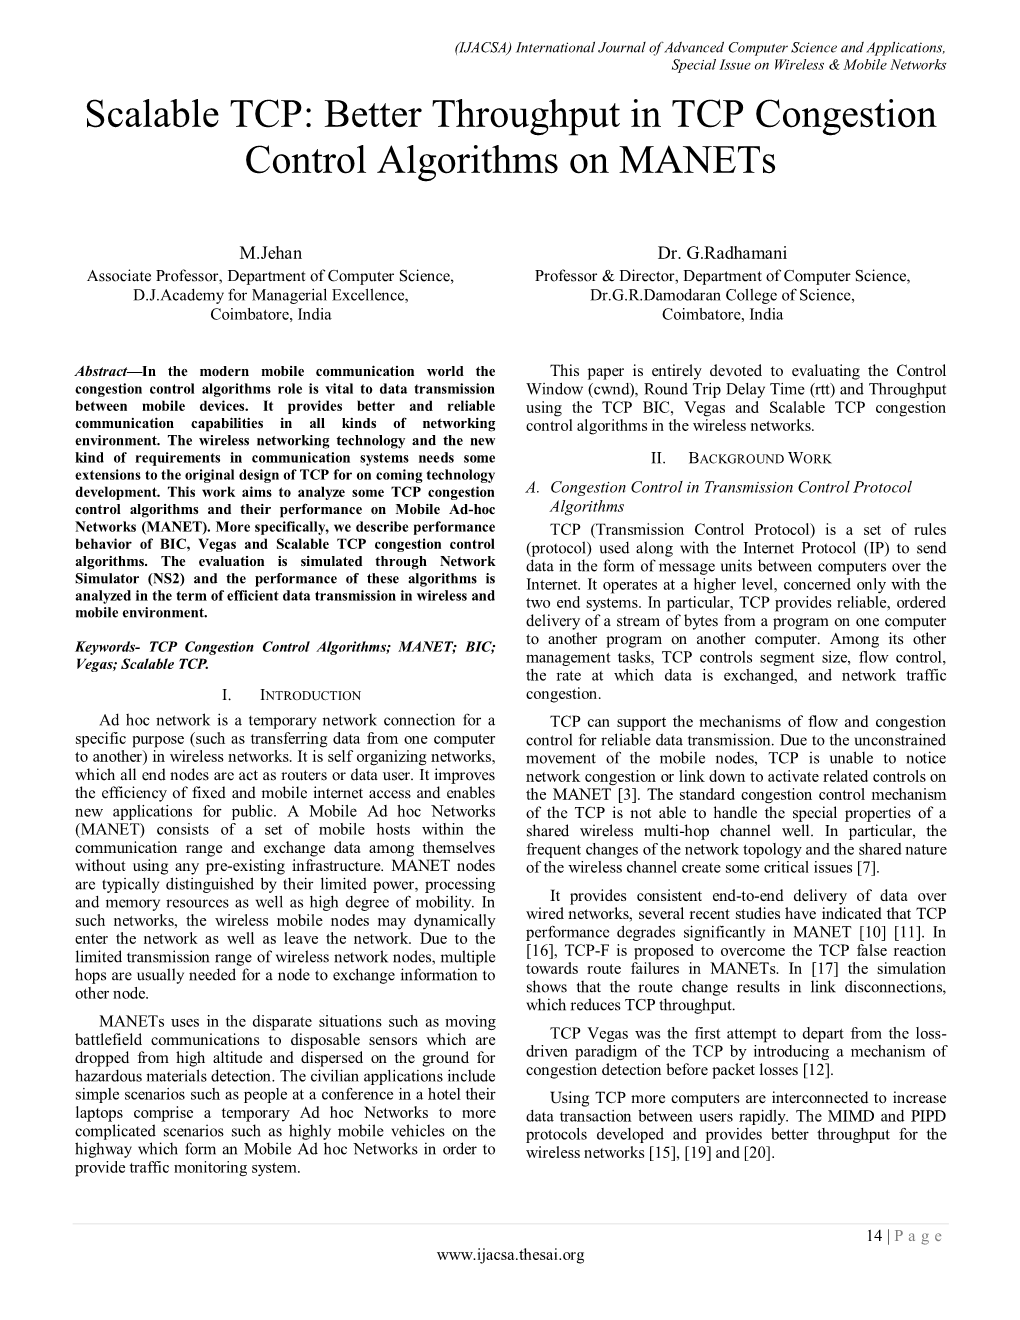 Better Throughput in TCP Congestion Control Algorithms on Manets